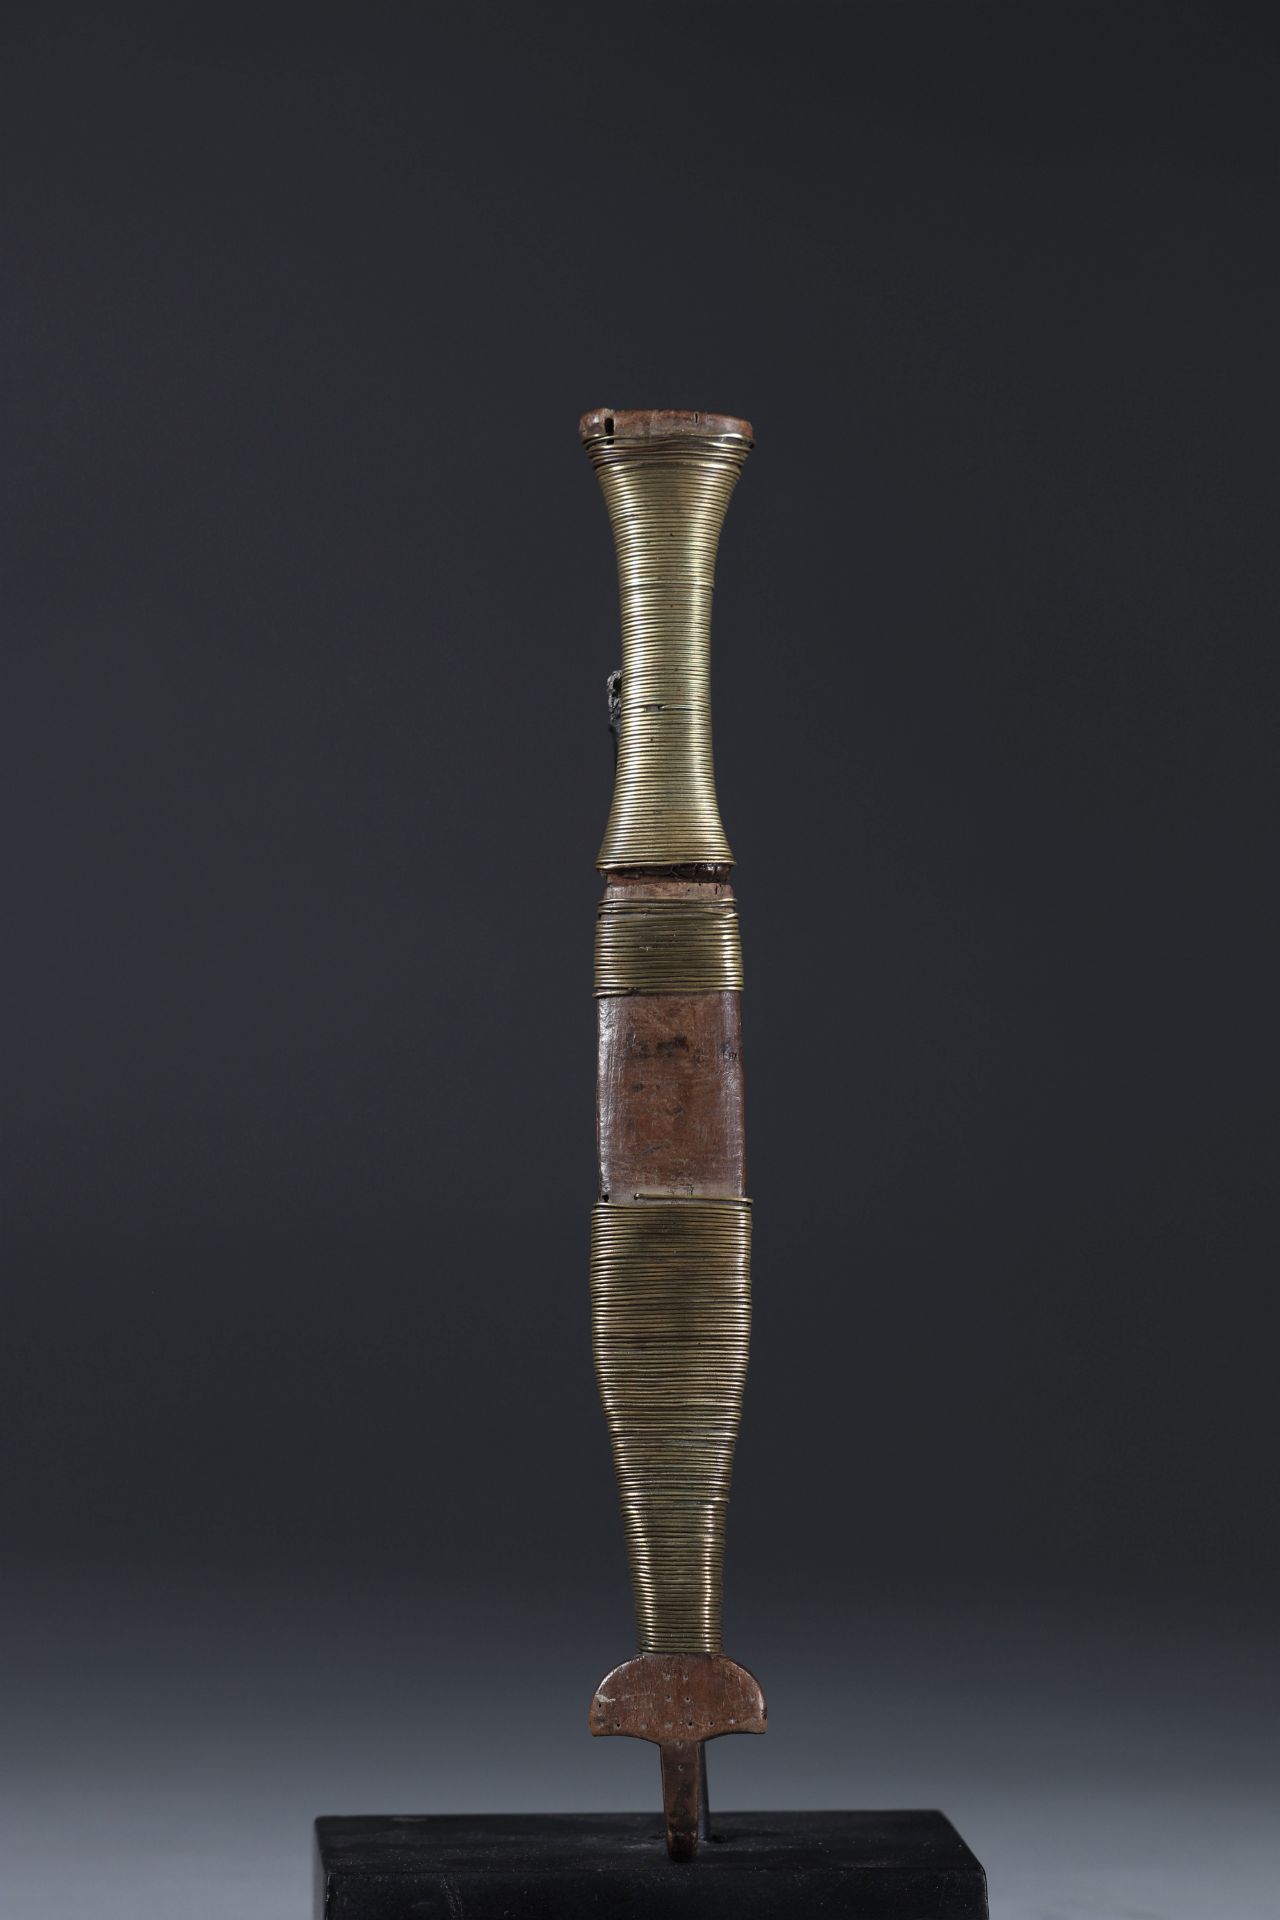 Shona knife South Africa early 20th century - Image 2 of 3